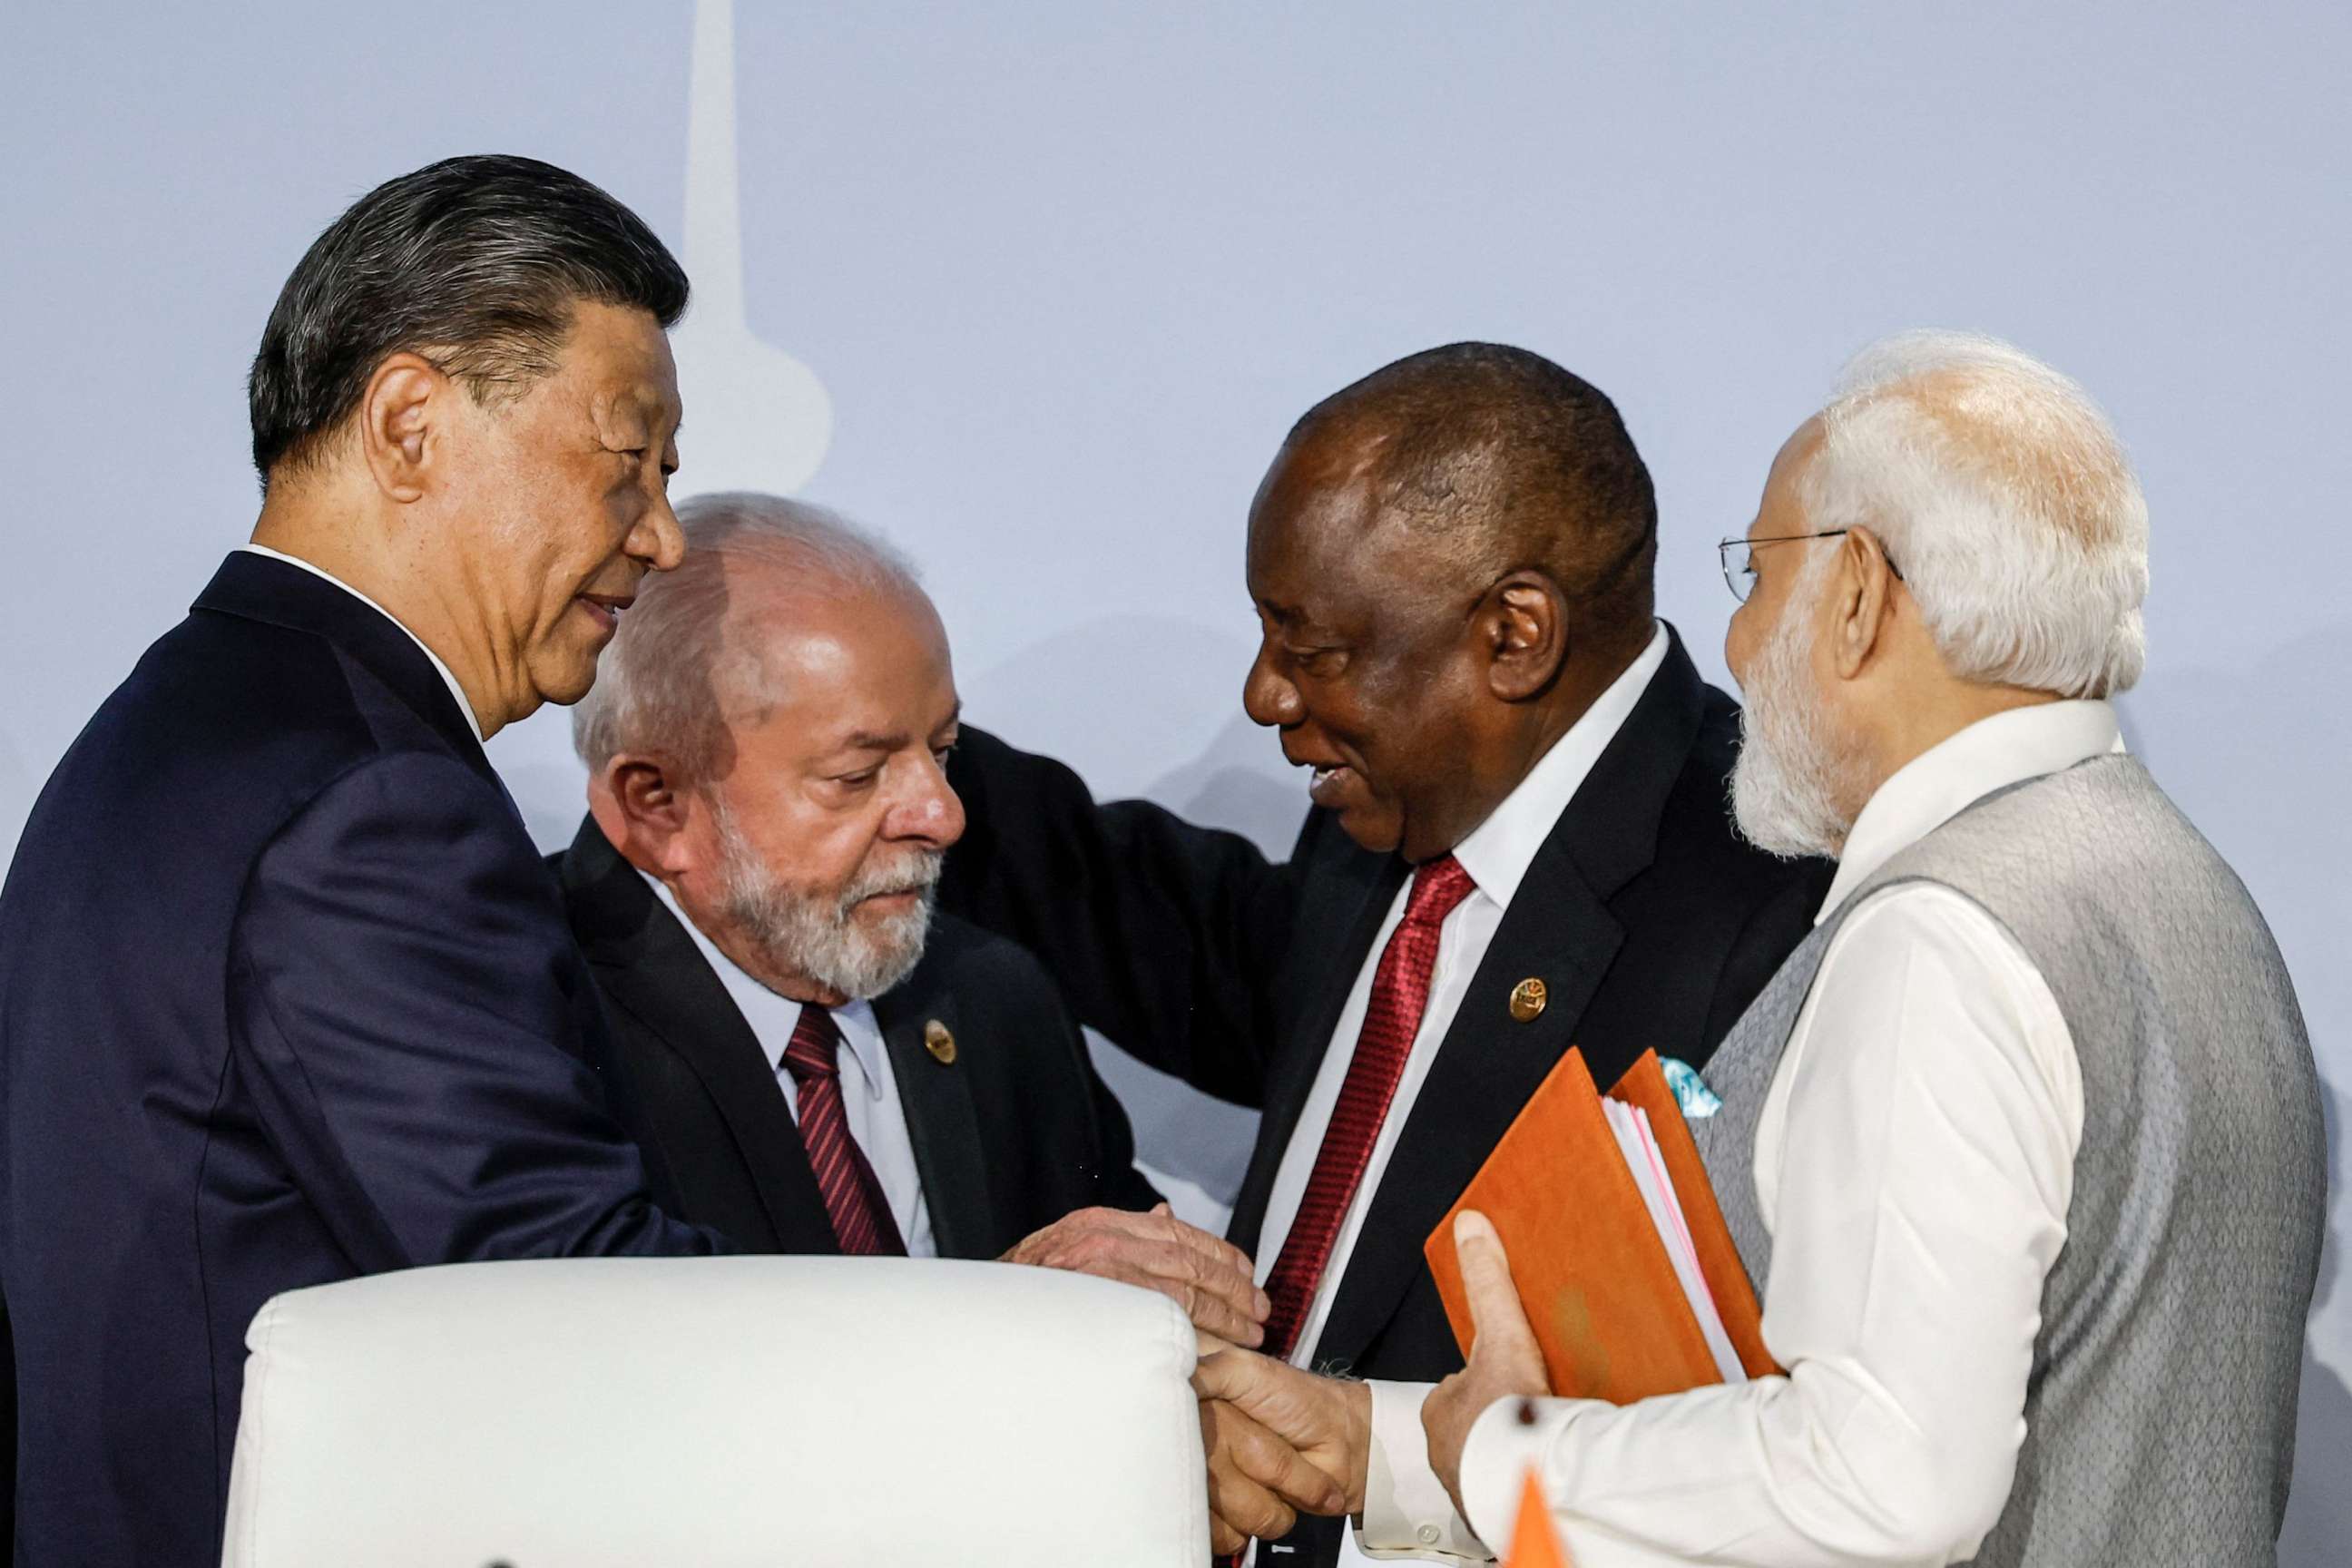 PHOTO: President of China Xi Jinping, President of Brazil Luiz Inacio Lula da Silva, South African President Cyril Ramaphosa and Prime Minister of India Narendra Modi gesture during the 2023 BRICS Summit in Johannesburg on August 24, 2023.